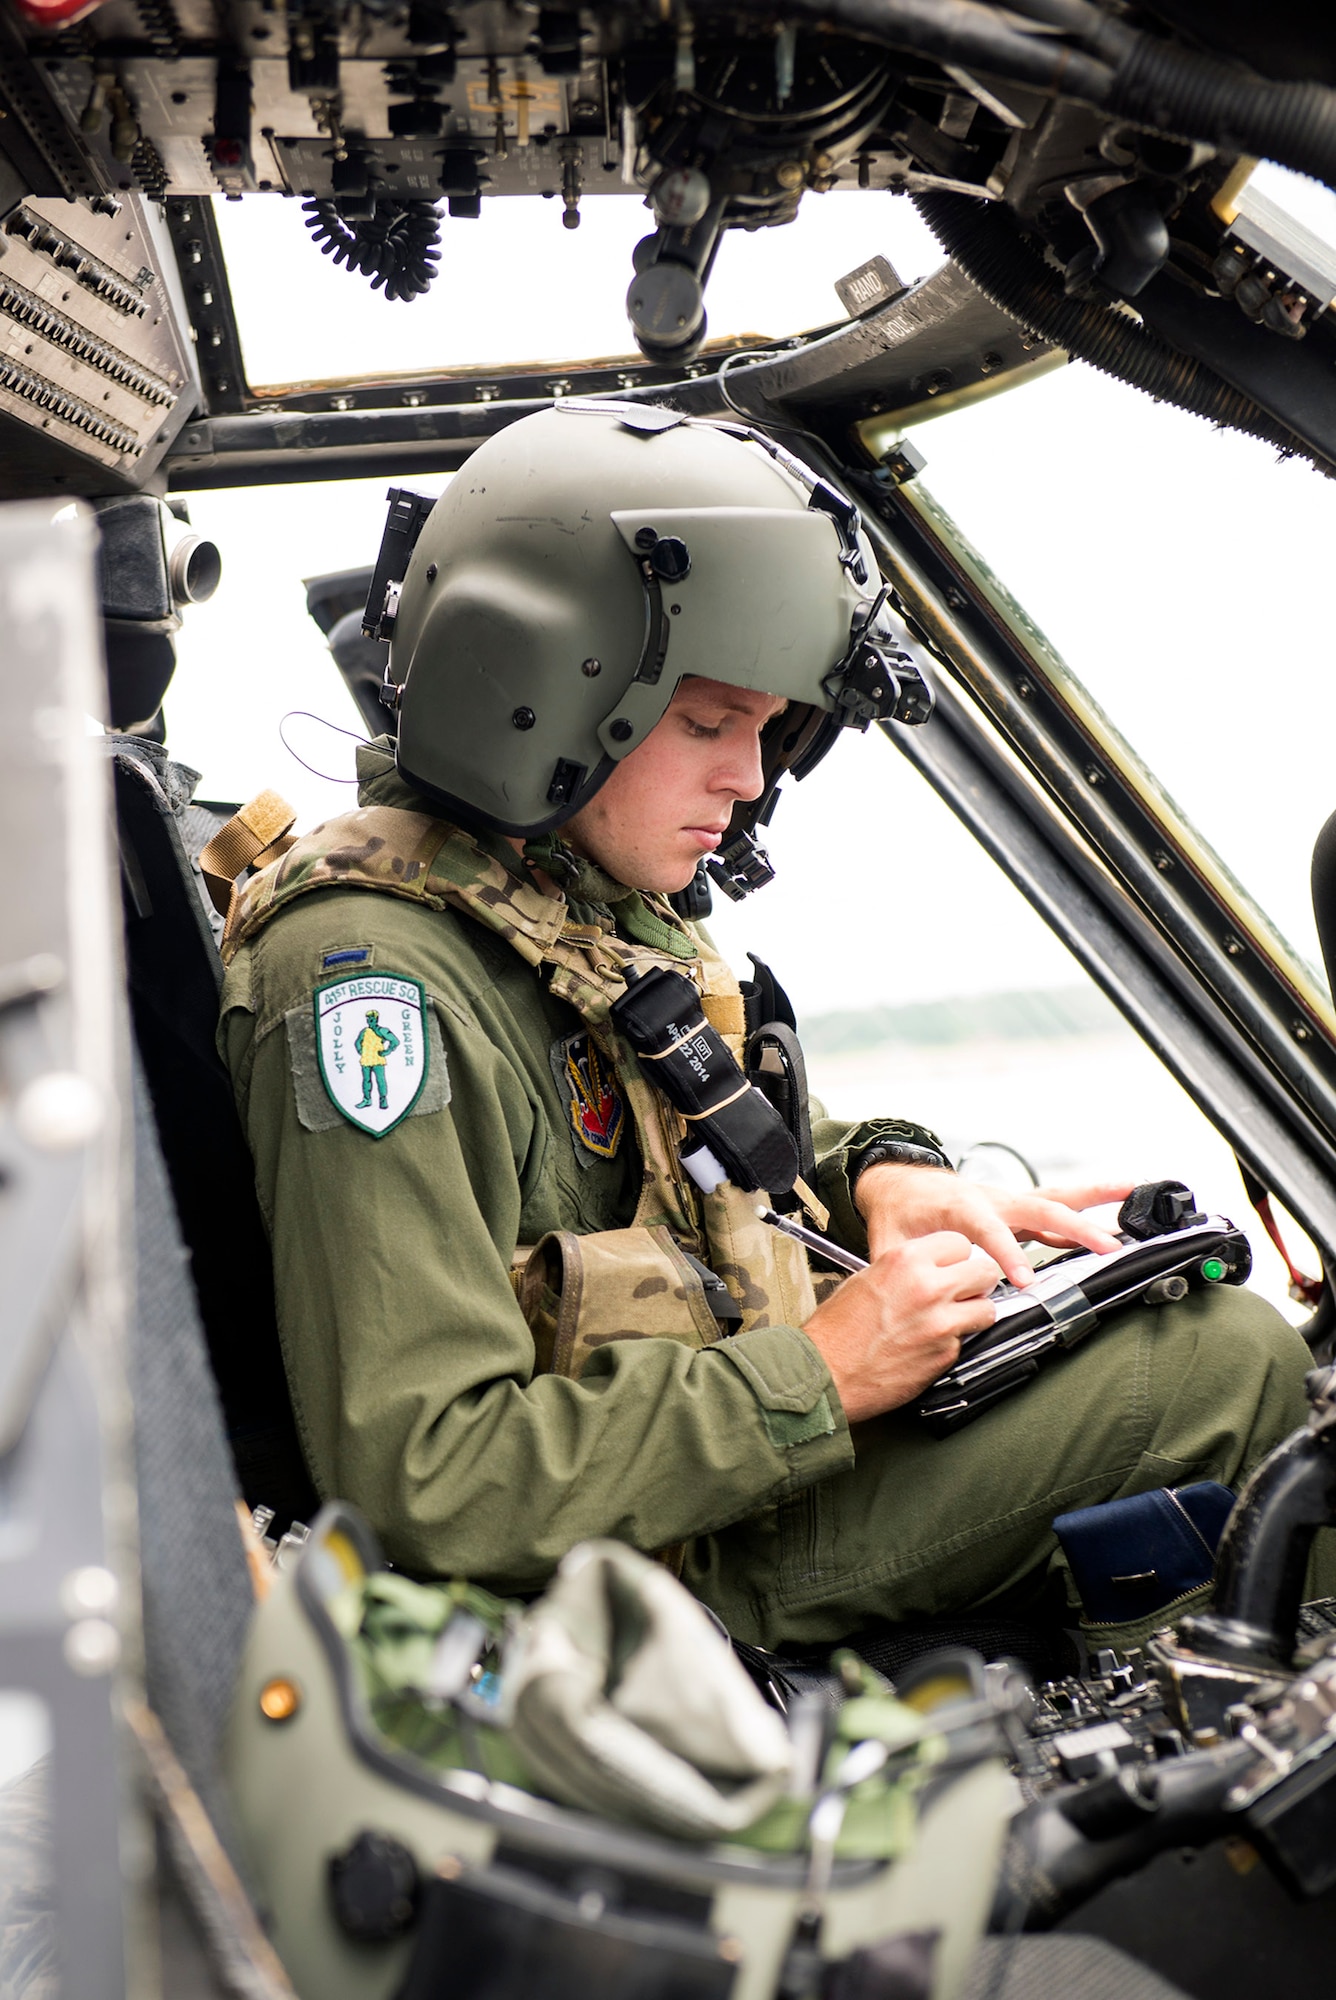 A 41st Rescue Squadron HH-60G Pave Hawk pilot records data during a pre-flight inspection, Aug. 10, 2016, at Moody Air Force Base, Ga. The 41st RQS pilots rely on the 41st Helicopter Maintenance Unit’s crew chiefs to locate and diagnose potential helicopter component discrepancies during pre-flight inspections. (U.S. Air Force photo by Airman 1st Class Greg Nash)